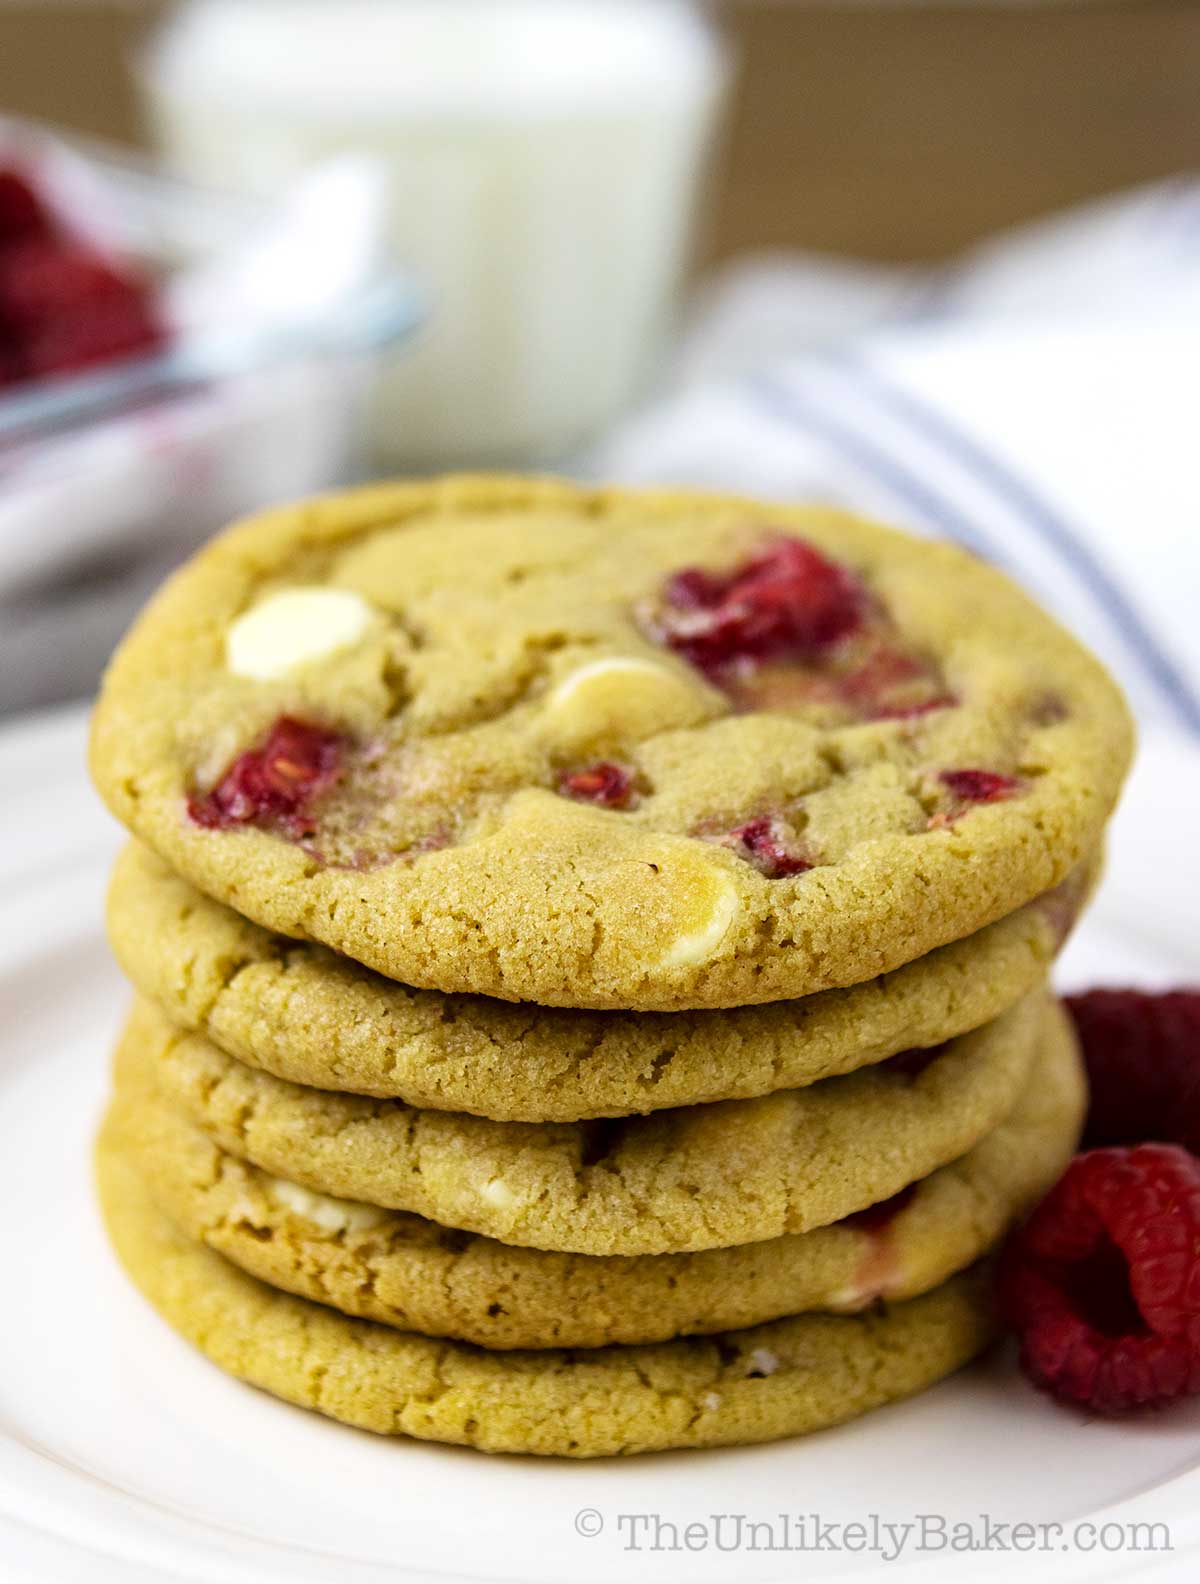 Tender raspberry and white chocolate cookies on a plate.